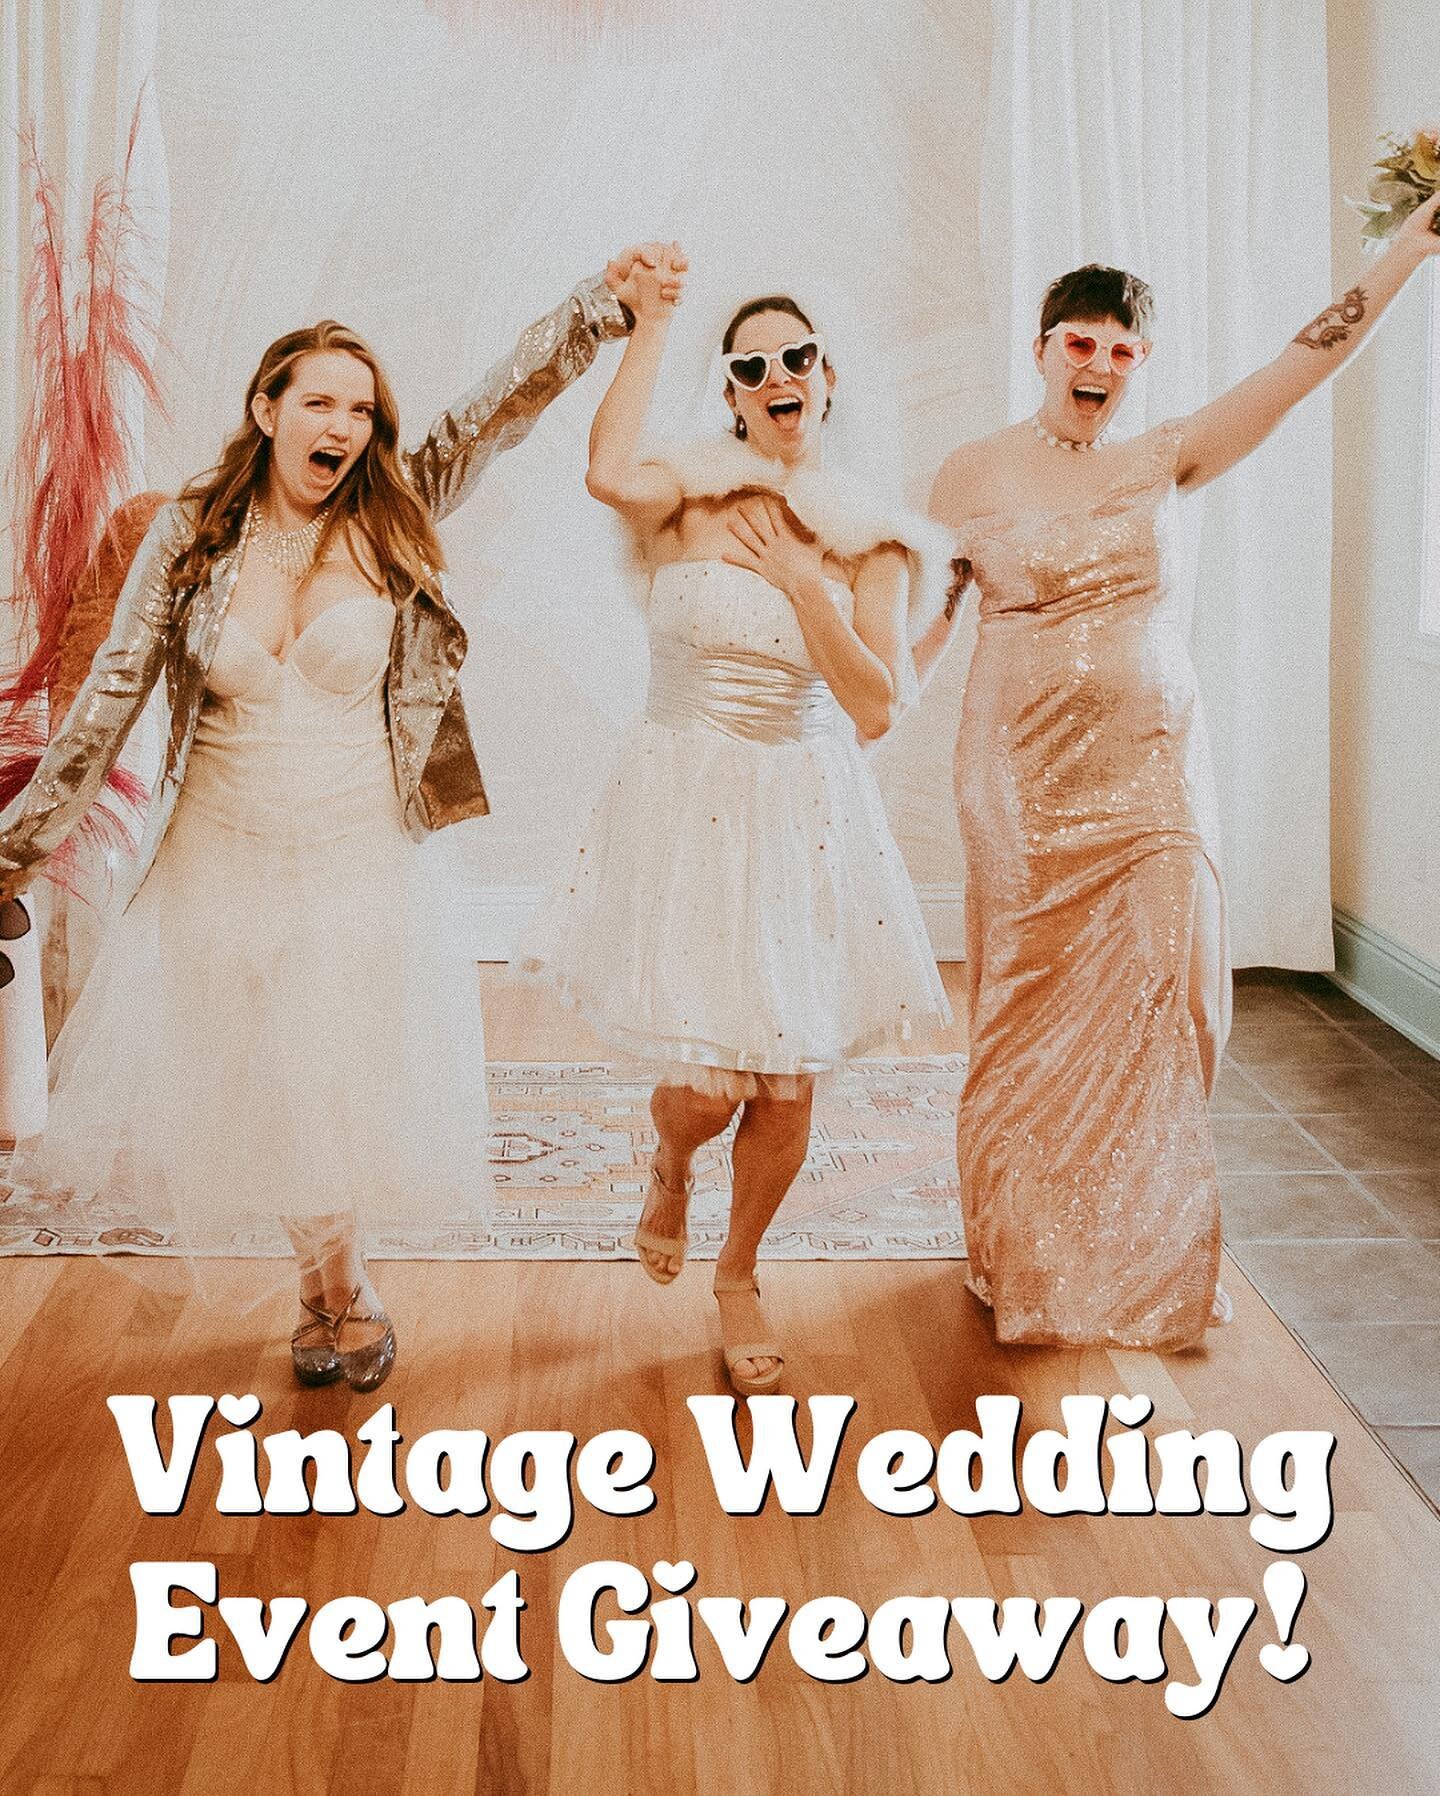 If you&rsquo;re a vintage lovin&rsquo; bride or groom to be, it&rsquo;s your lucky day! We&rsquo;re giving away this amazing prize pack granting you FIRST DIBS to the loot at our Vintage Wedding Event on March 5th! 👰&zwj;♀️🤵🏻&zwj;♀️🤵&zwj;♂️

1 of